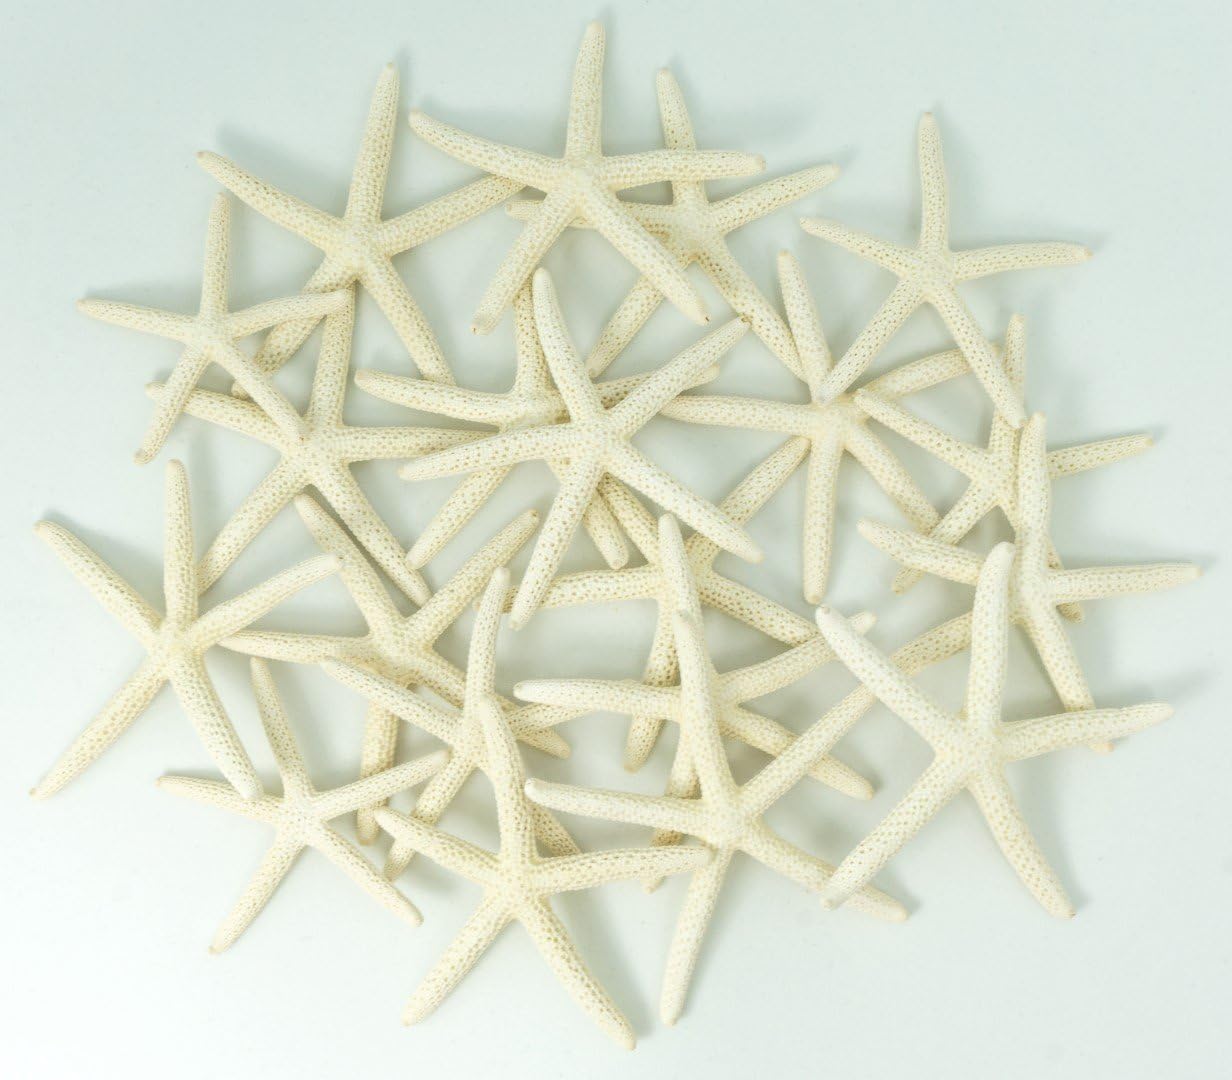 Starfish Decor - 20 Pack White Finger Star Fish 2-3 Inch - Starfish for Crafts - White Starfish Wall D&#xE9;cor - Beach Wedding Starfish - Beach Starfish D&#xE9;cor - Star Fish Decorations